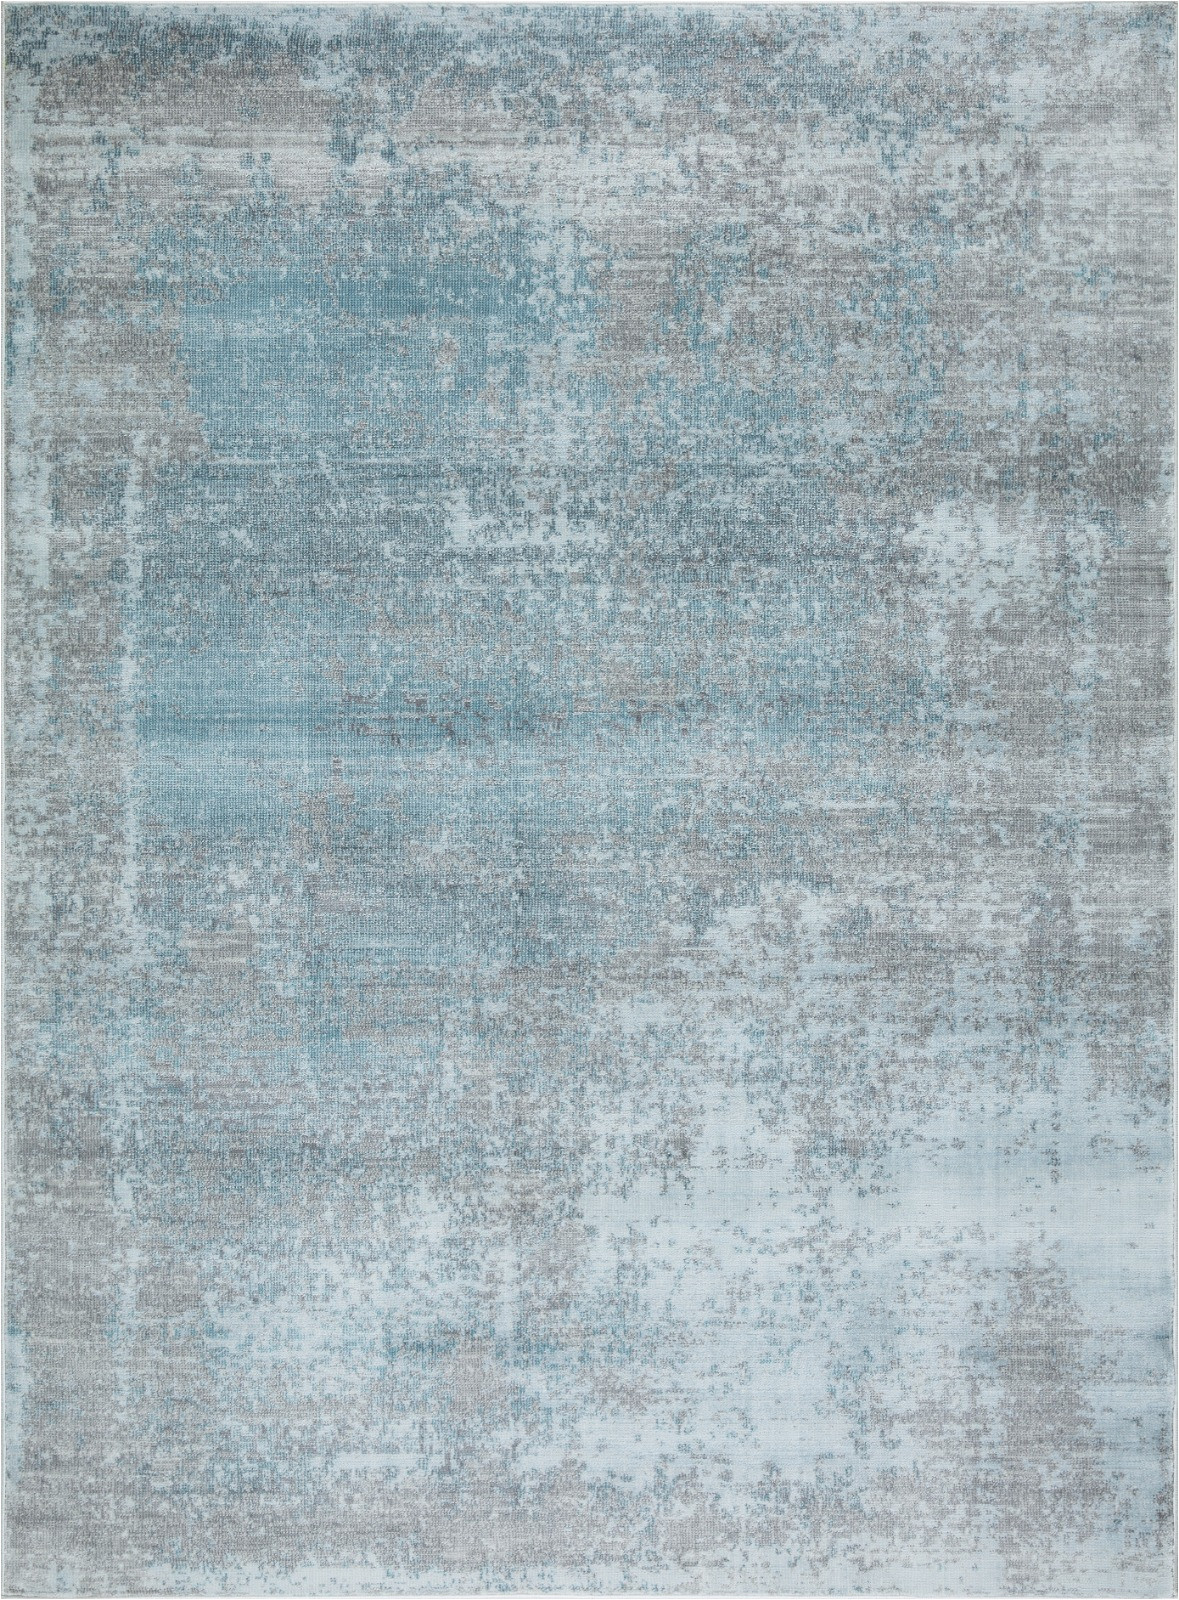 Blue and Gray Shag Rug Mod Arte Mirage Collection area Rug Modern Contemporary Style Abstract soft Plush Blue Gray 52 X 72